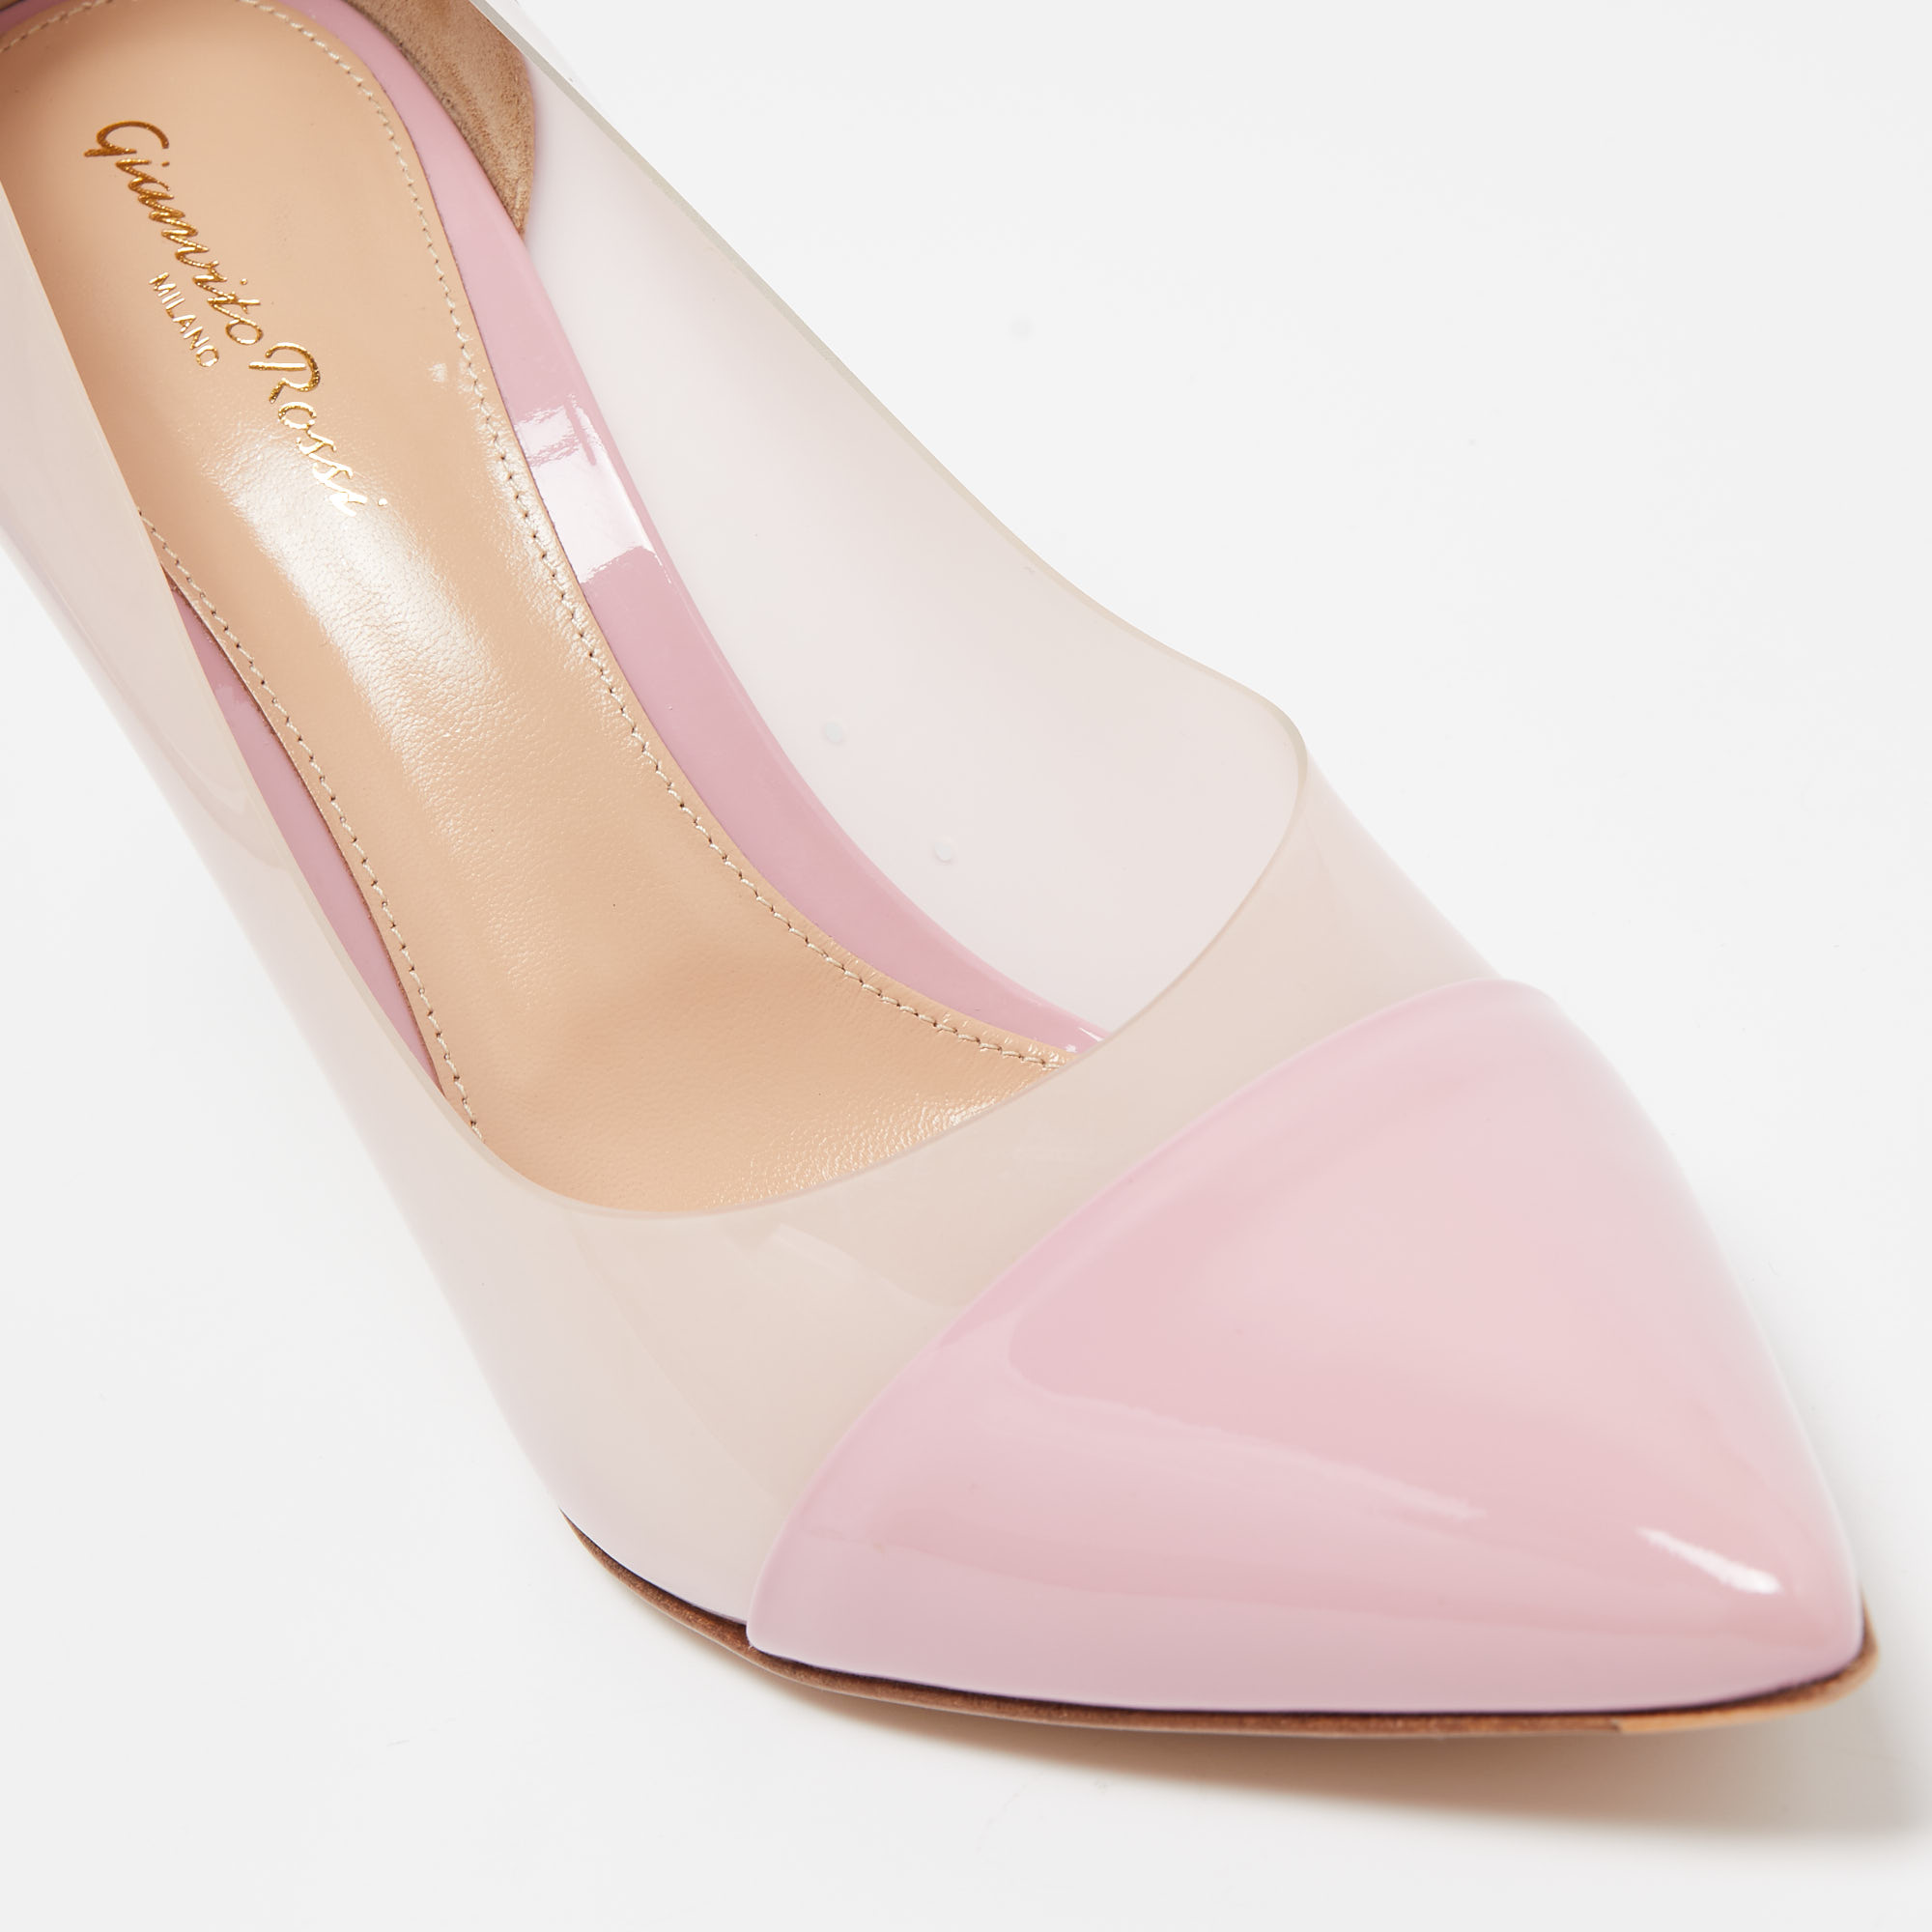 Gianvito Rossi Pink Patent Leather And PVC Plexi Pointed Toe Pumps Size 41